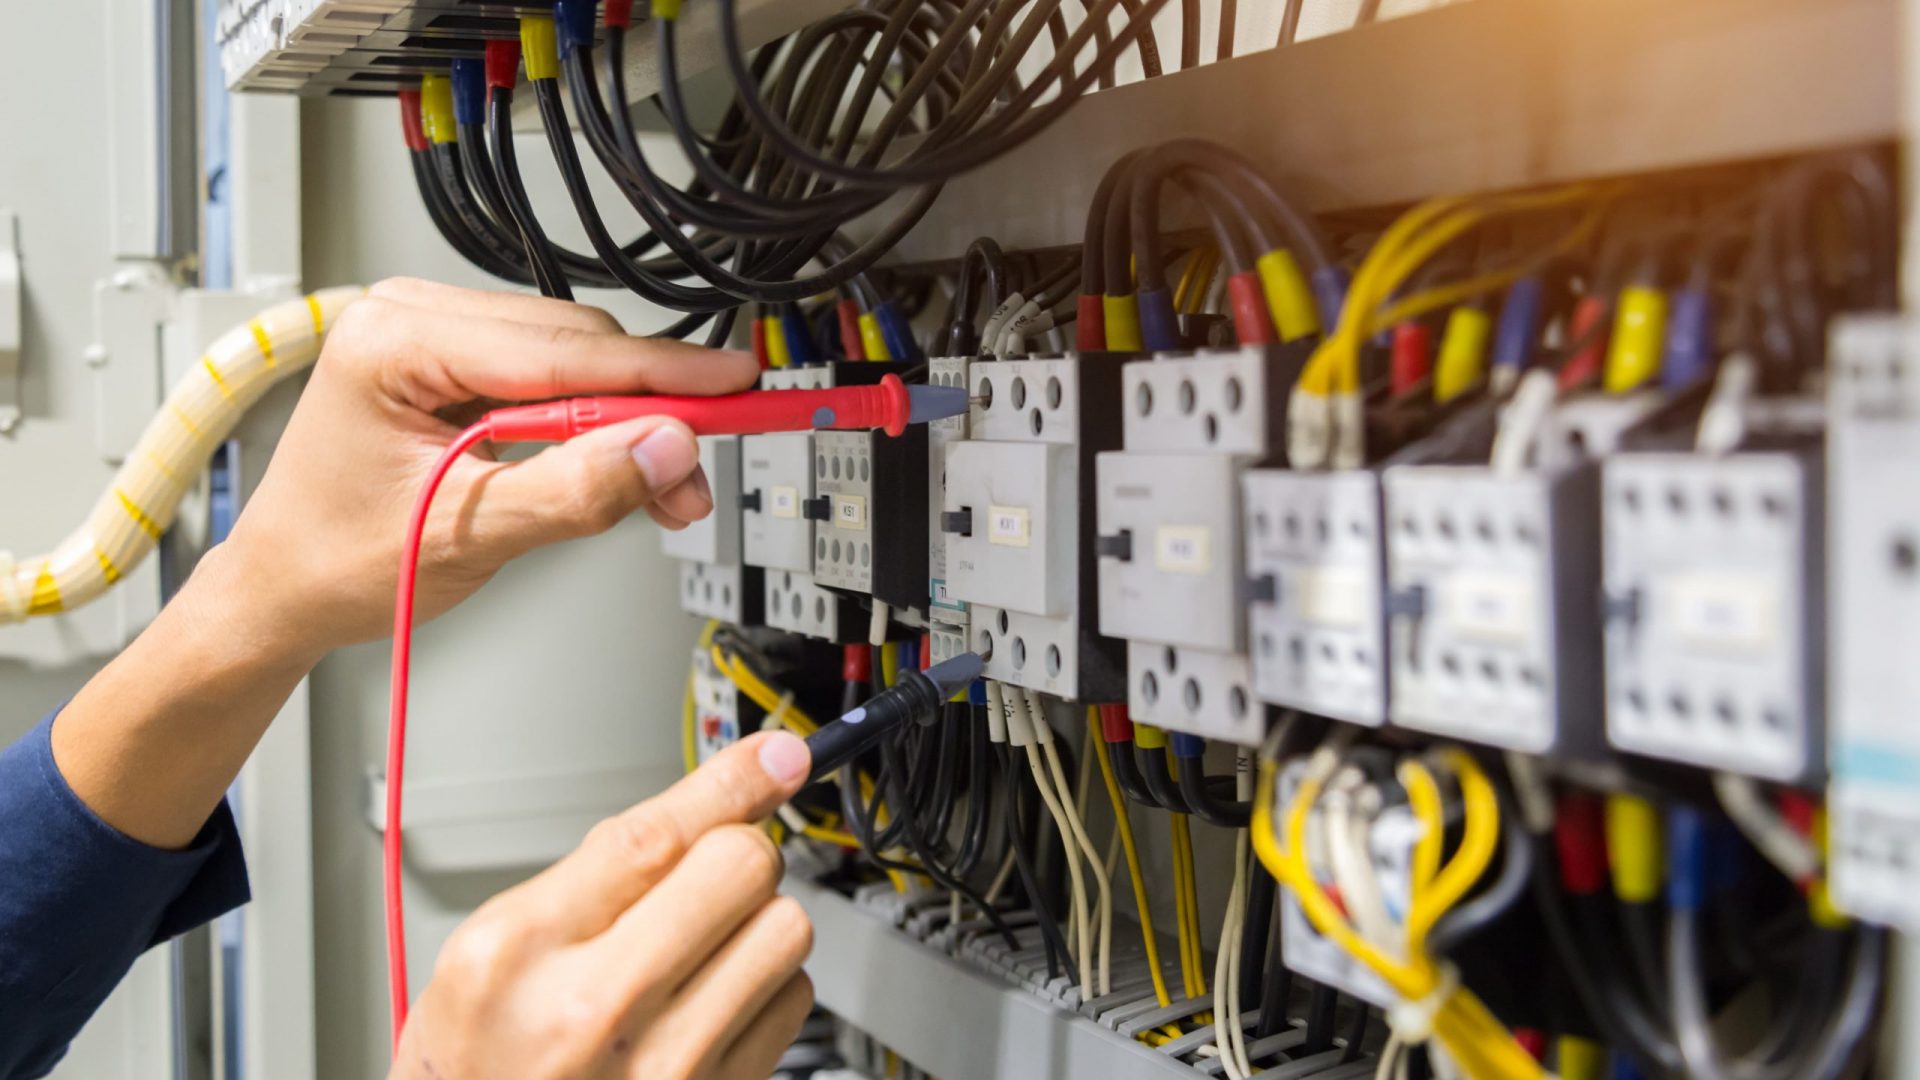 Learn the Basics of Home Electrical Wiring - Wiring Installation Guide